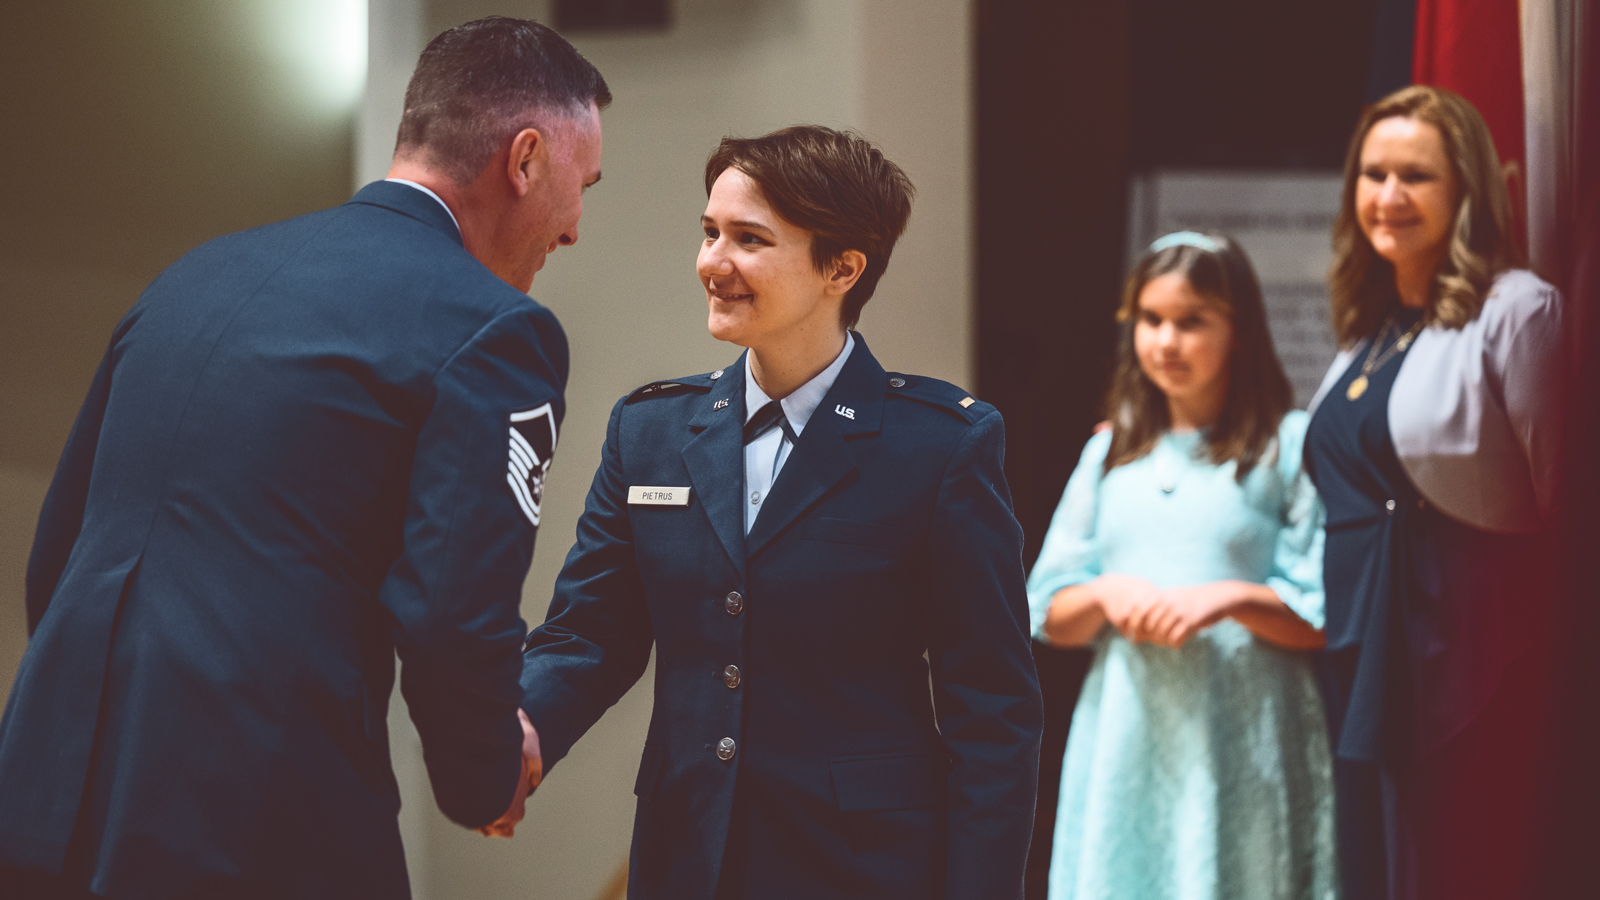 Claudia Pietrus, the first member of Cornell’s ROTC to commission into the U.S. Space Force, is sworn in as her family looks on during the May 26 commissioning ceremony in Alice Statler Auditorium